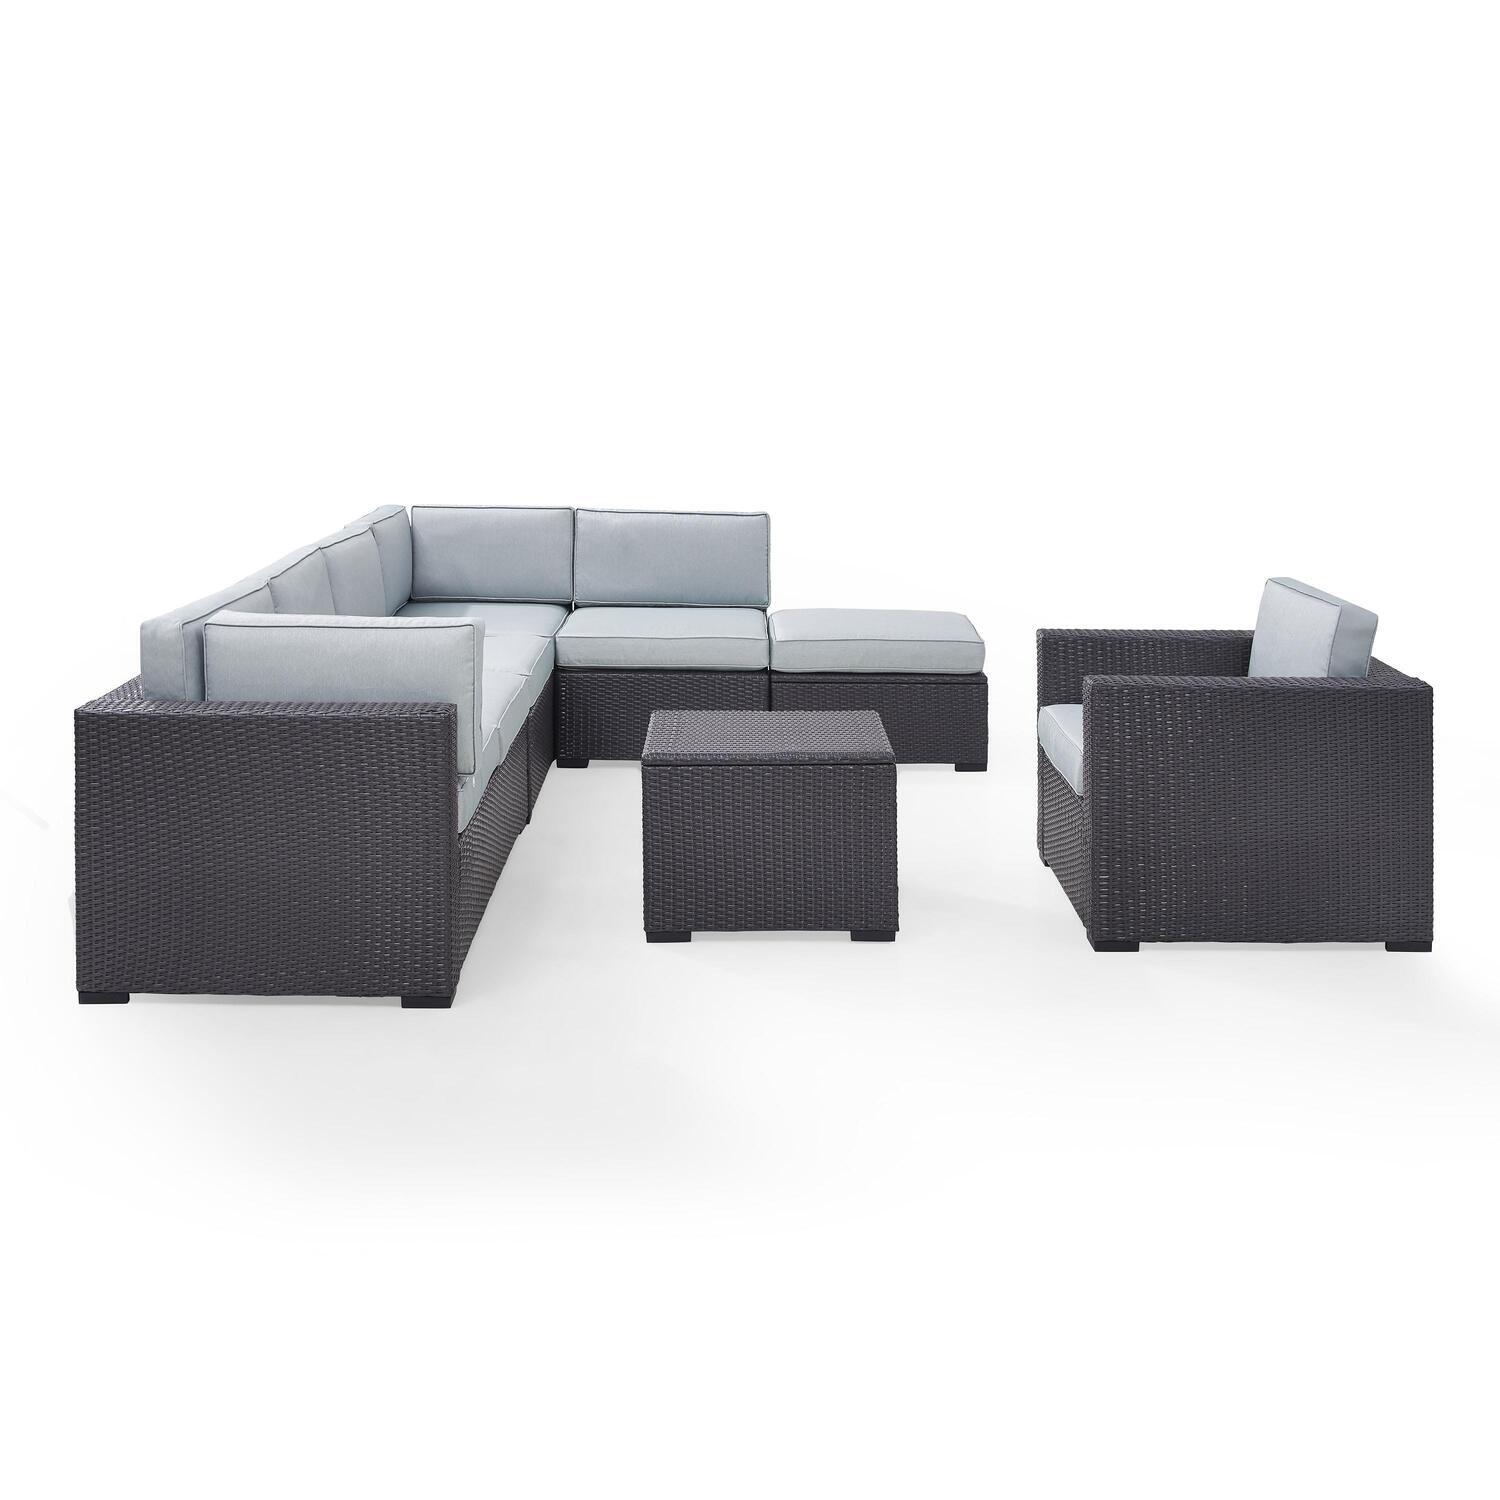 Crosley Furniture Biscayne 6 Piece Metal Patio Sectional Set in Brown/Blue - image 1 of 4